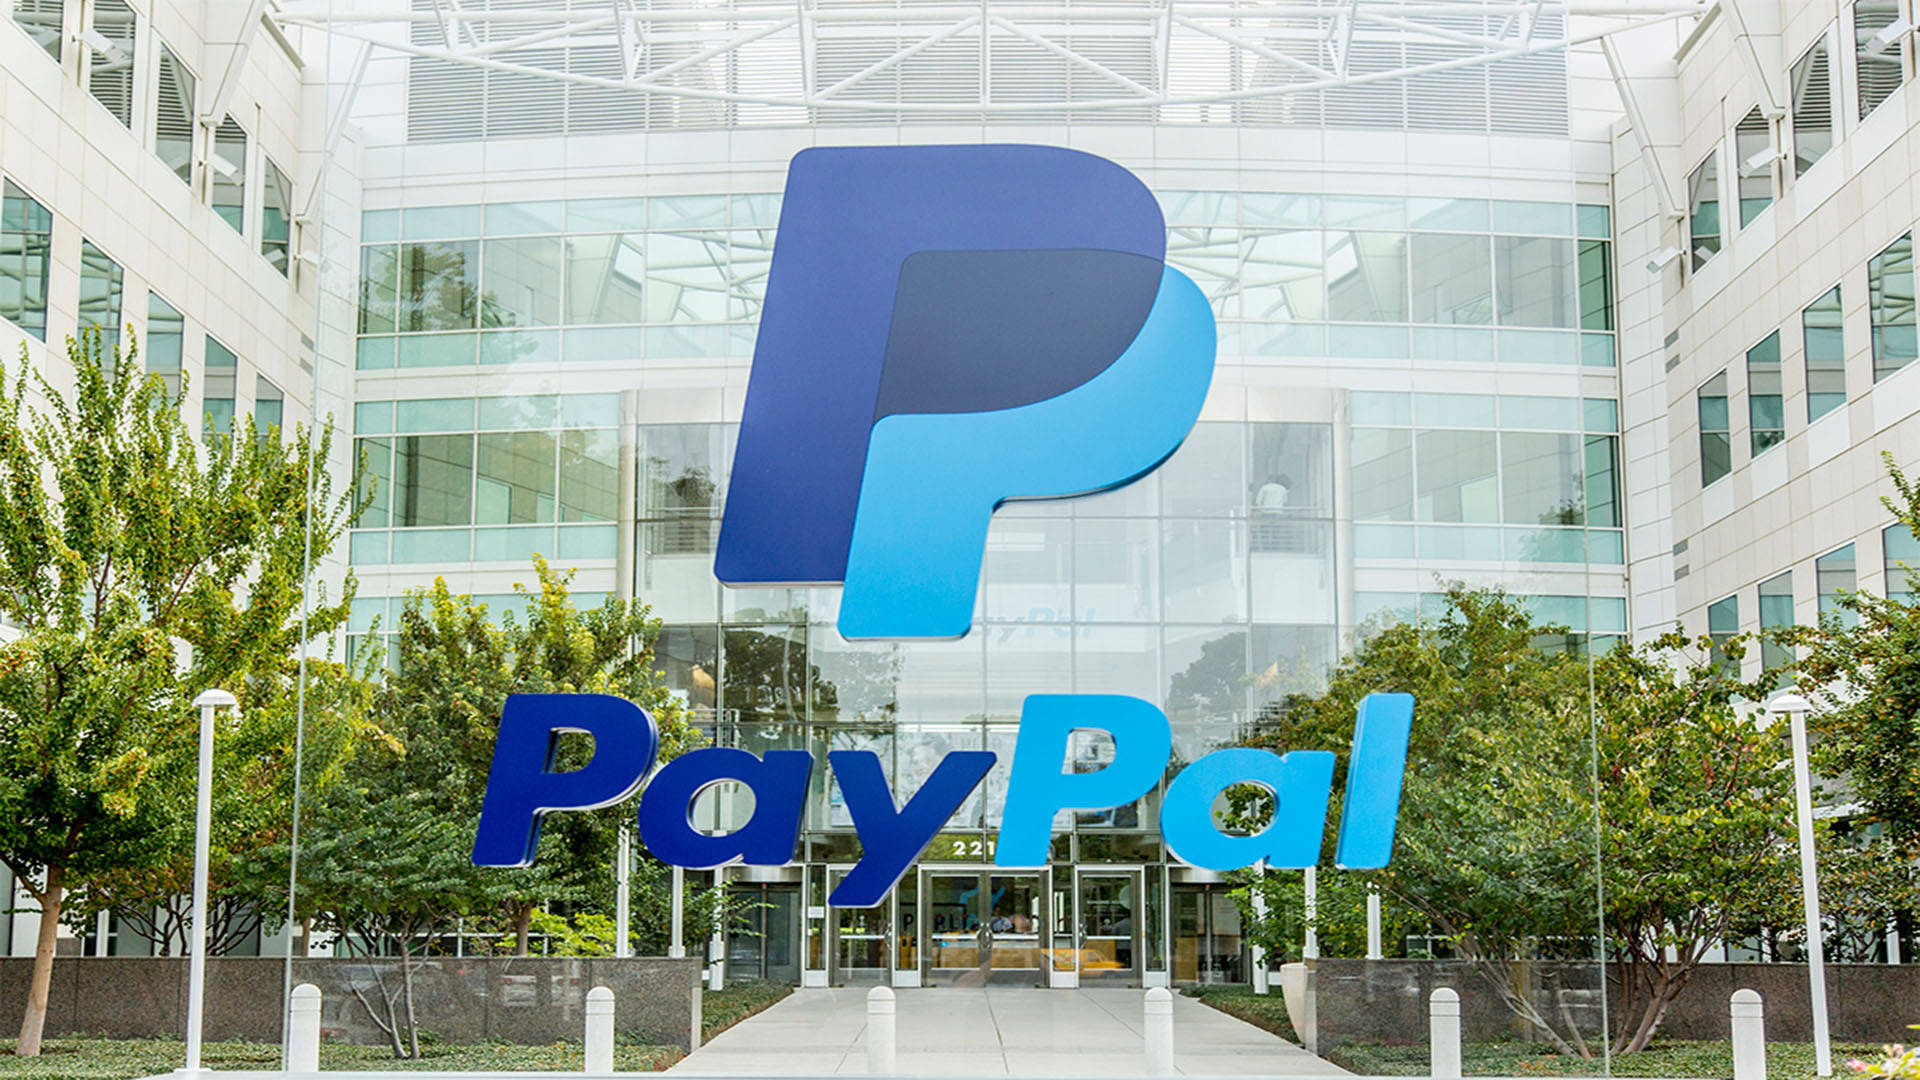 Paypal Corporate Headquarters Logo Background